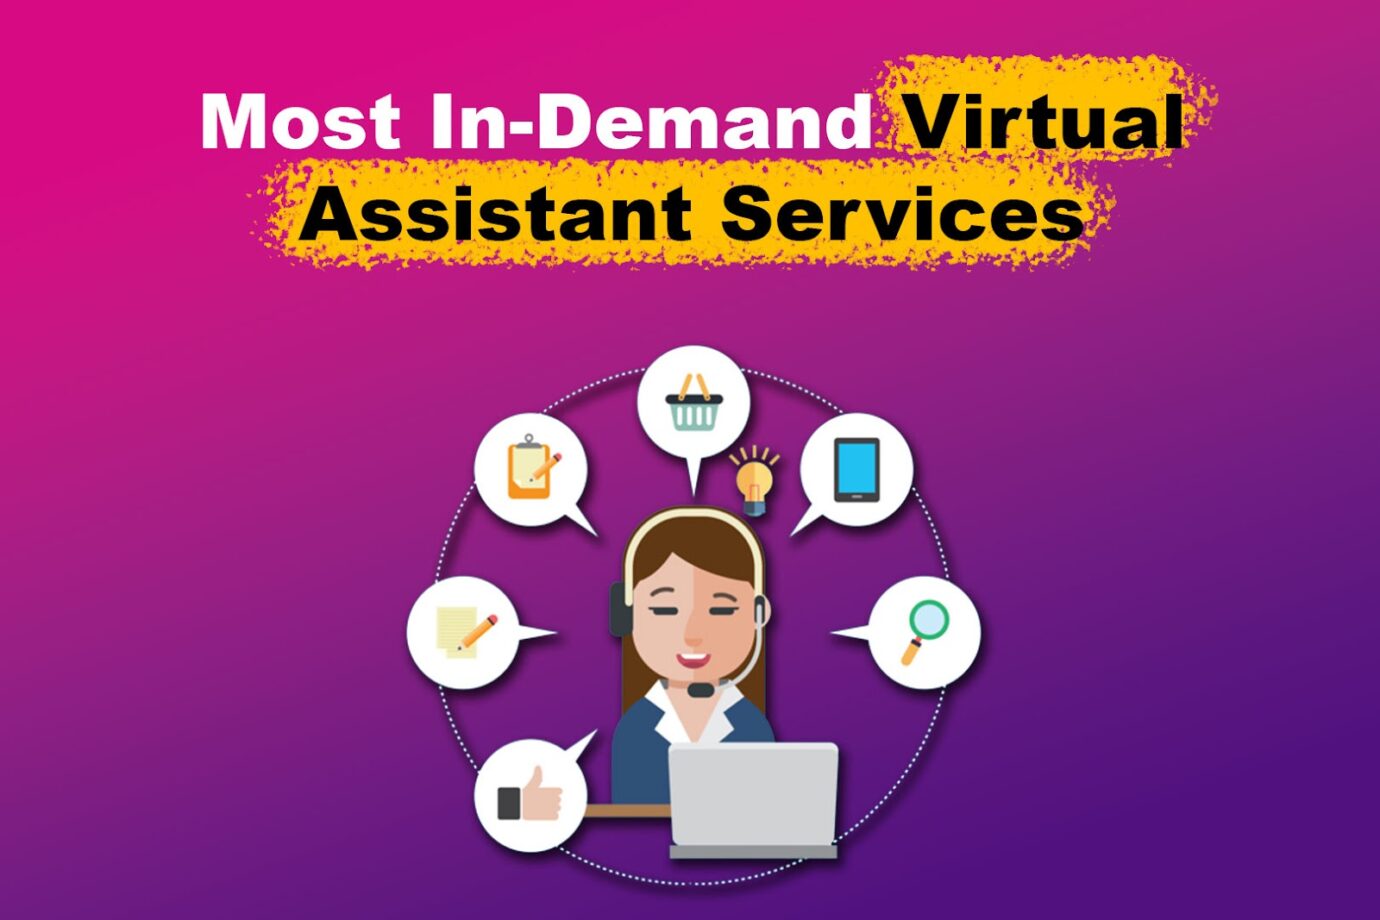 Most In-Demand Virtual Assistant Services